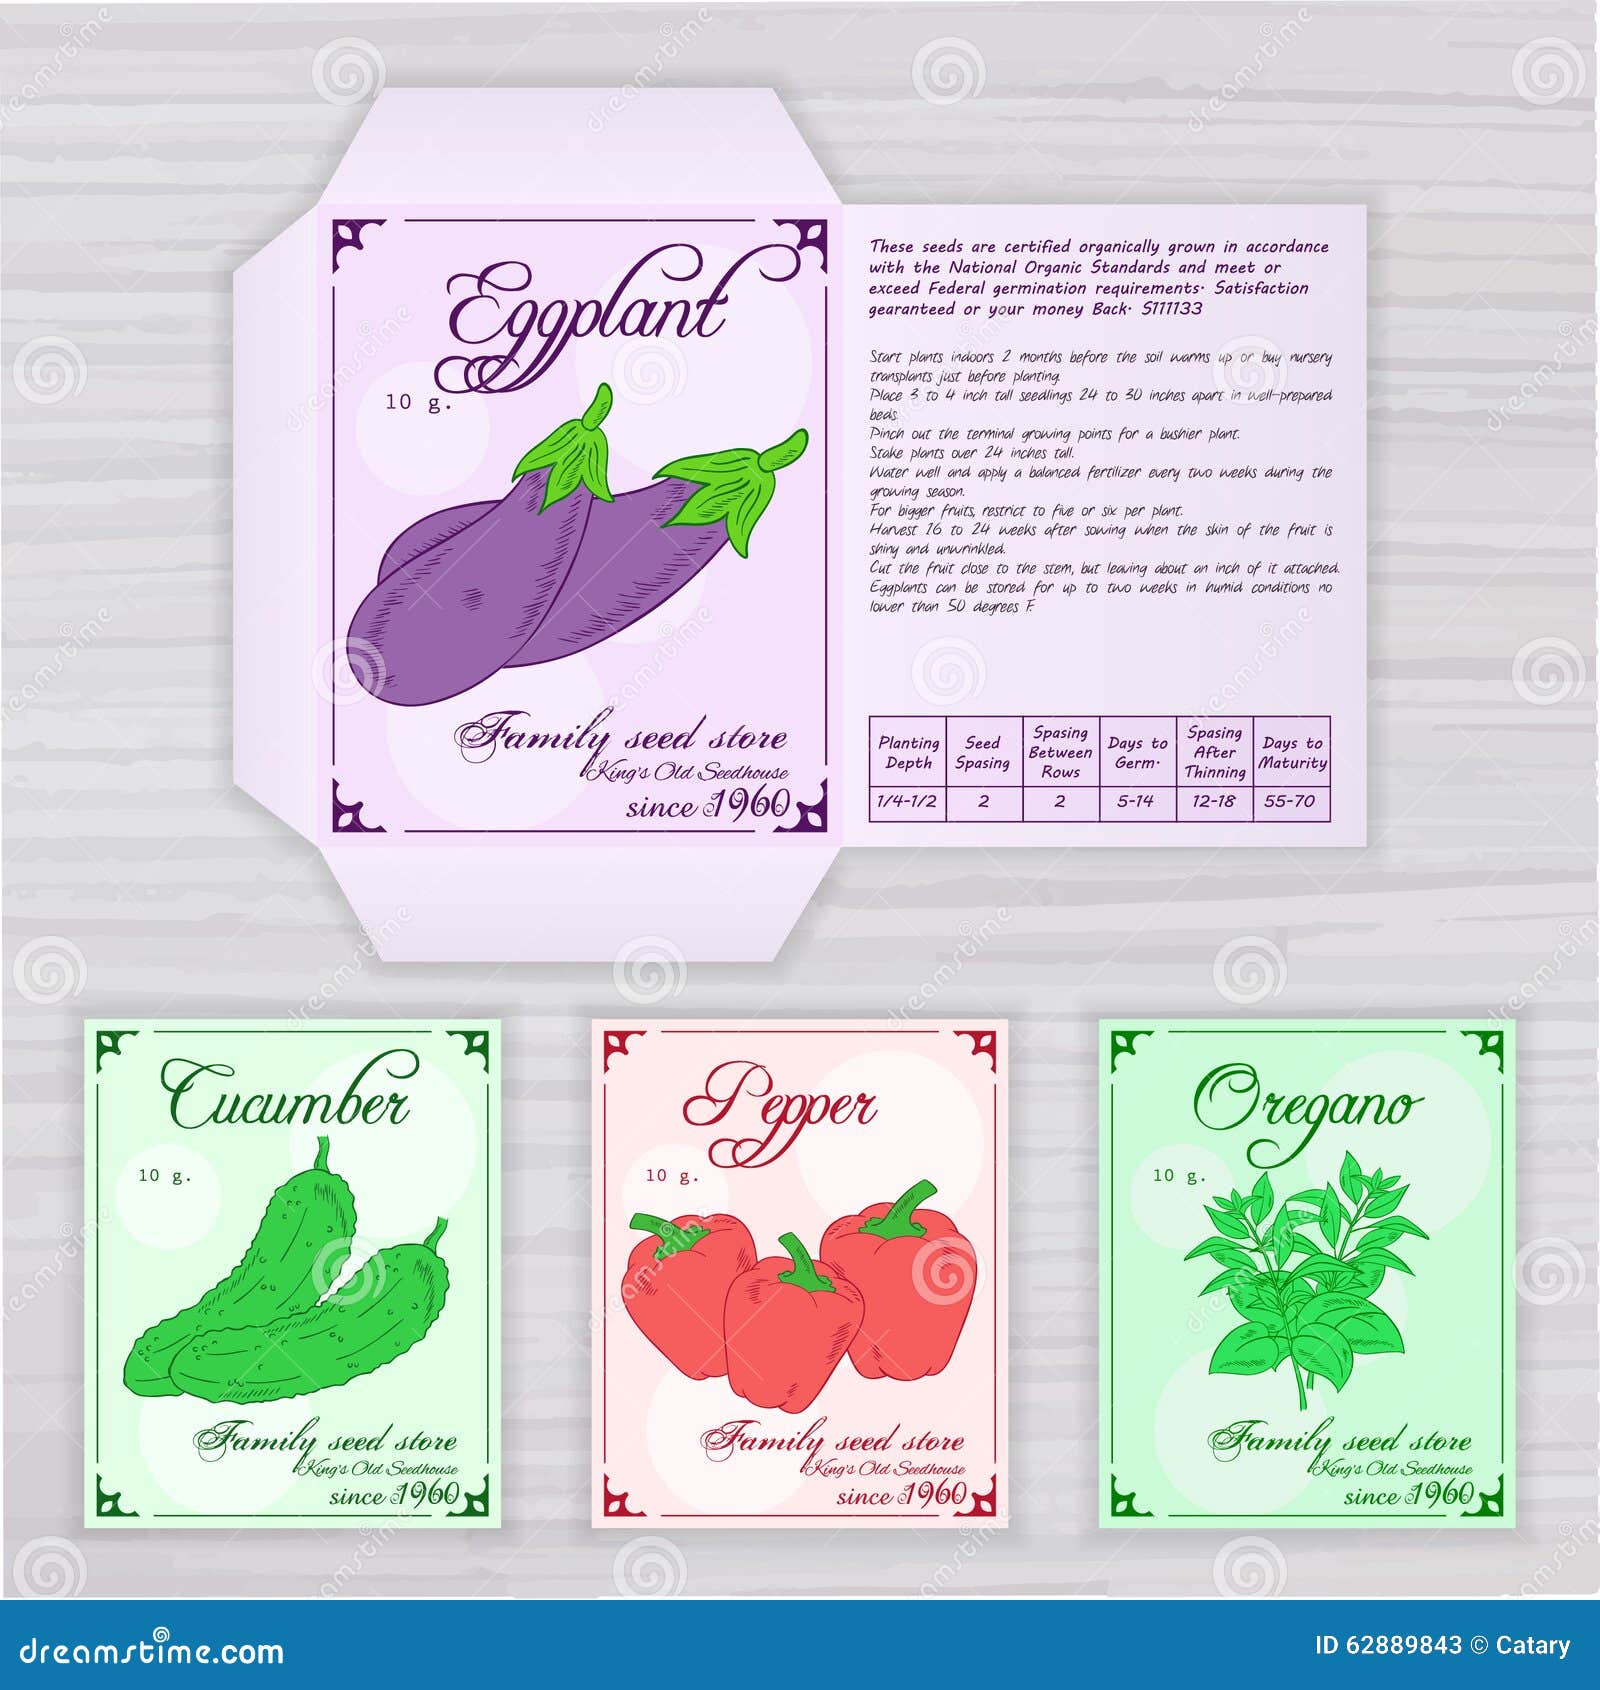 seed packet template stock illustrations 288 seed packet template stock illustrations vectors clipart dreamstime